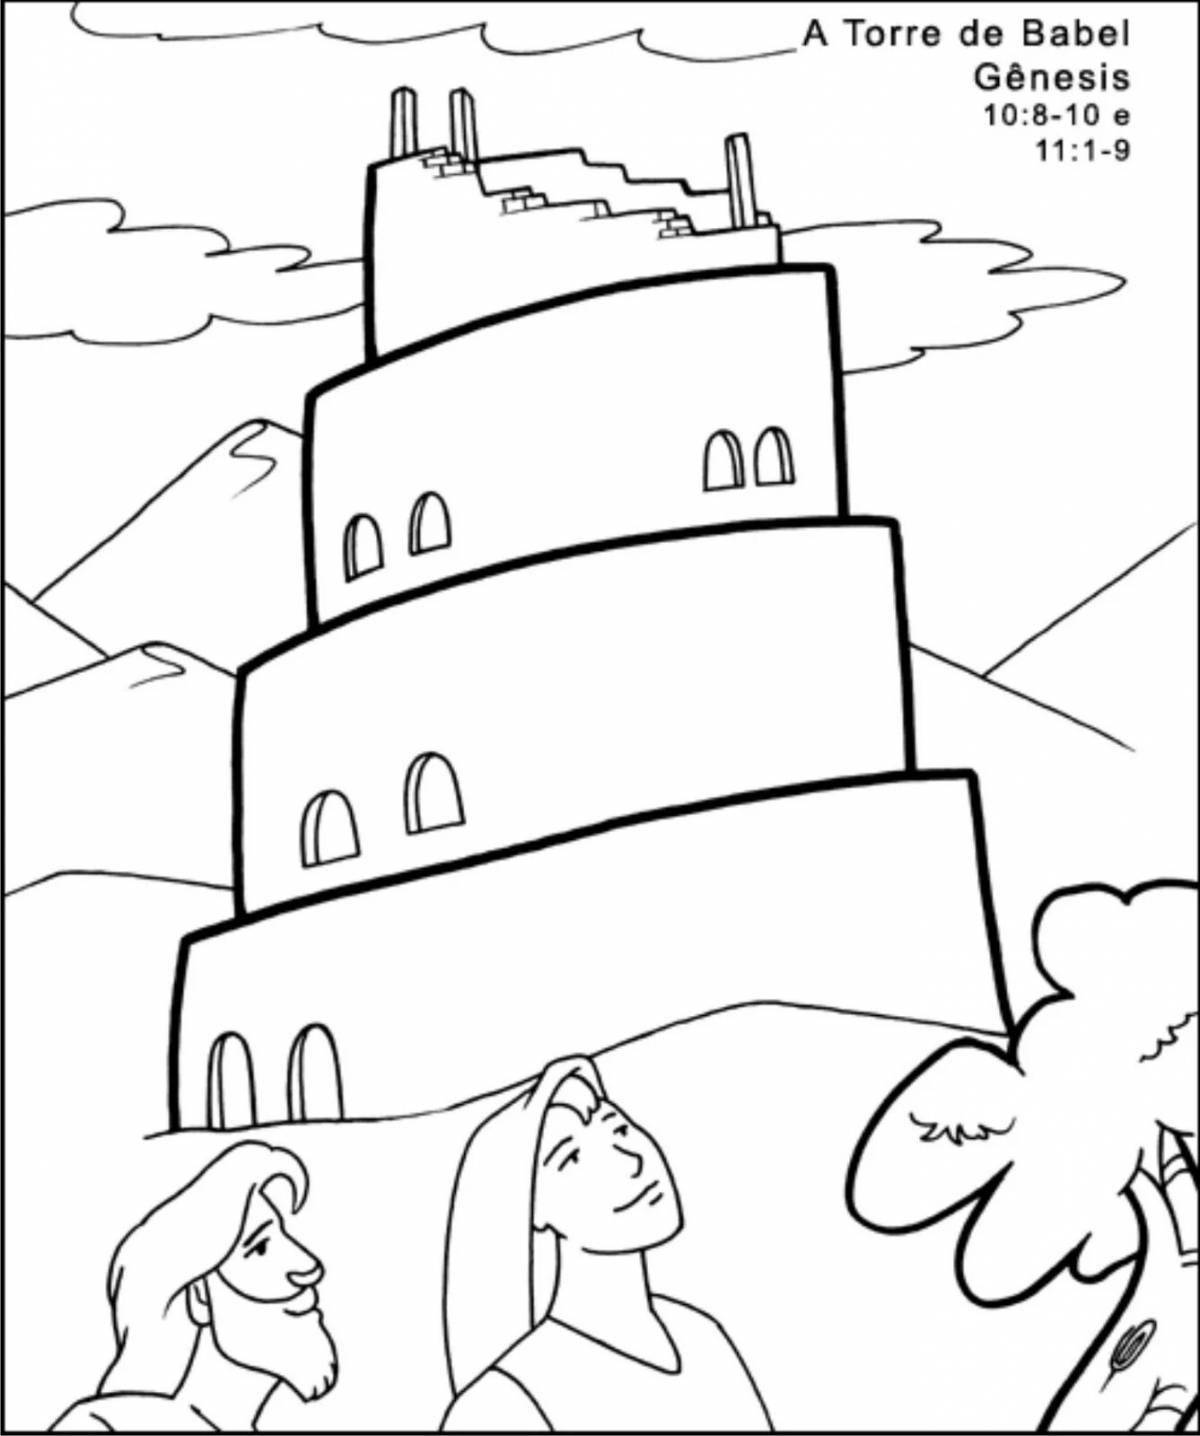 Amazing tower of Babel coloring book